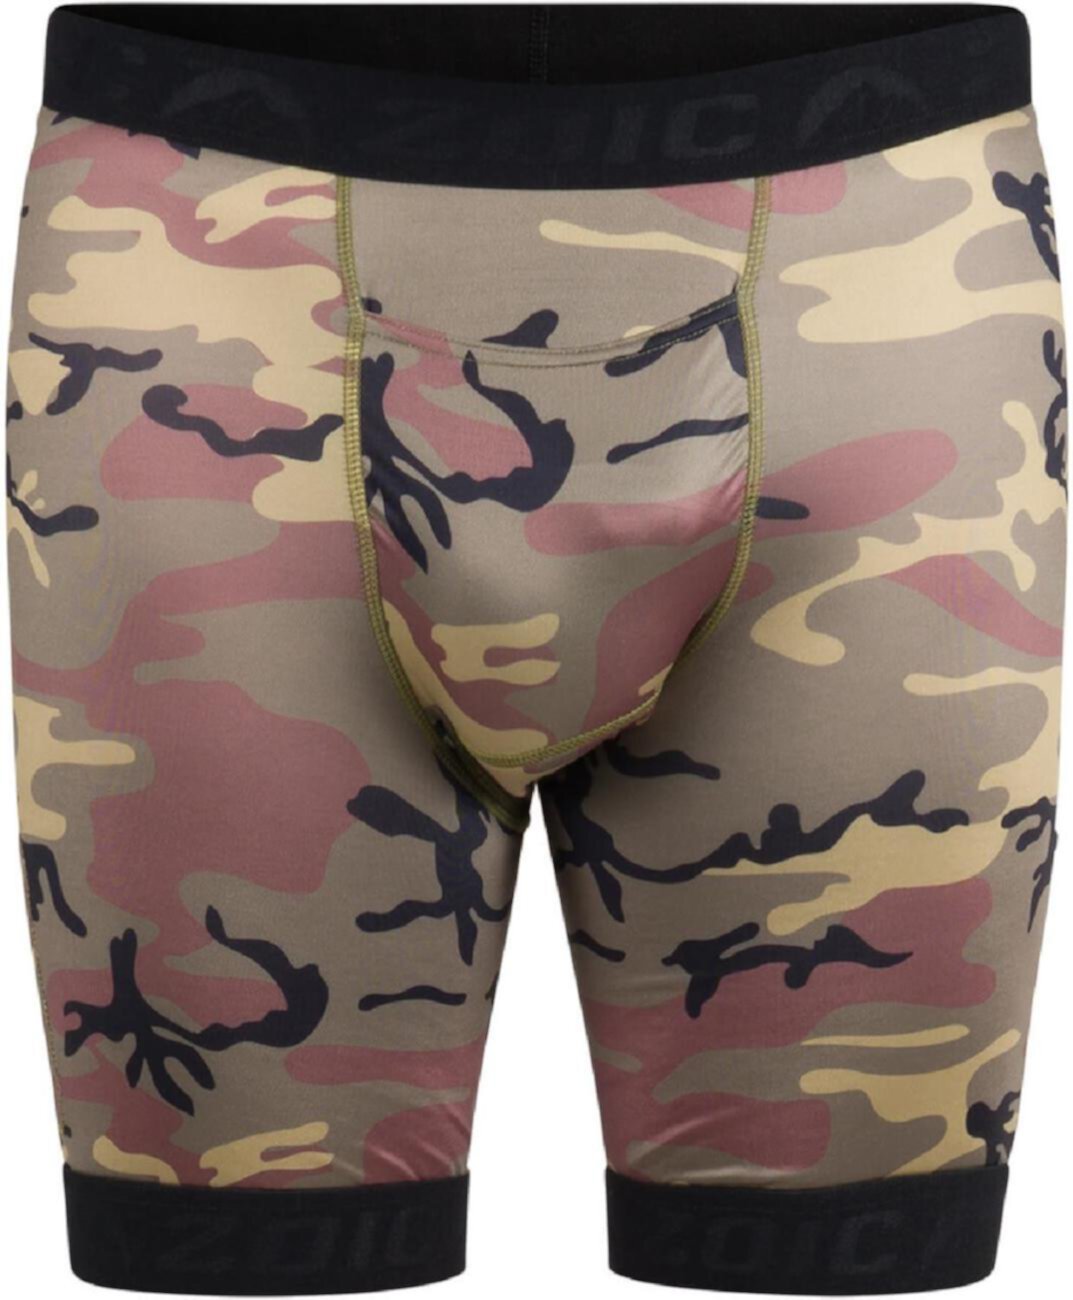 Premium Printed Liner Shorts with Fly - Men's Zoic